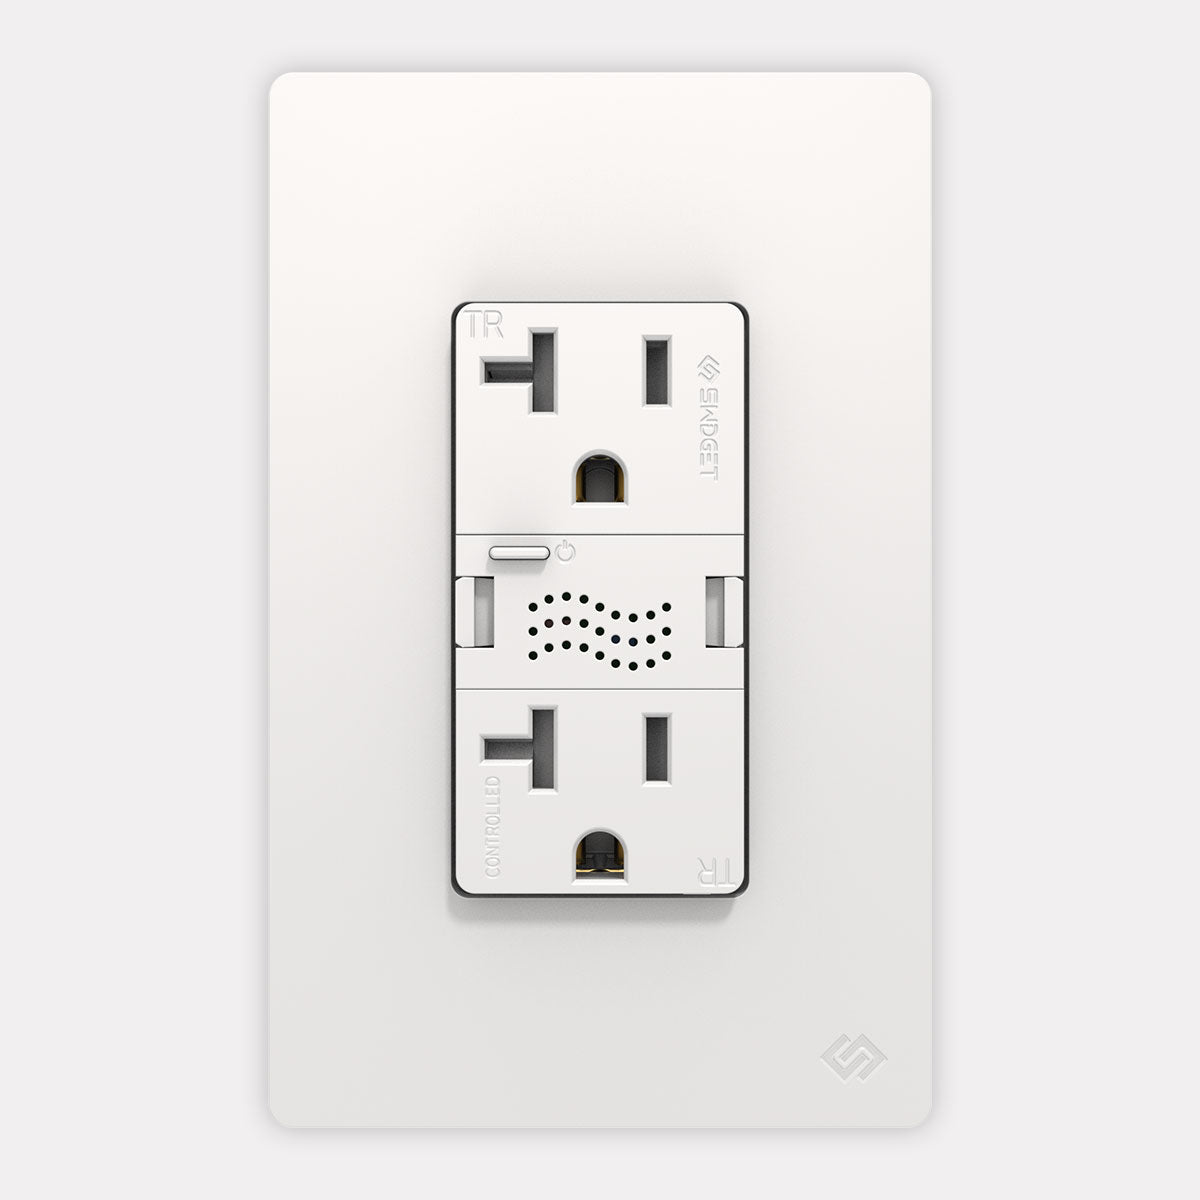 Build your own 20A Outlet